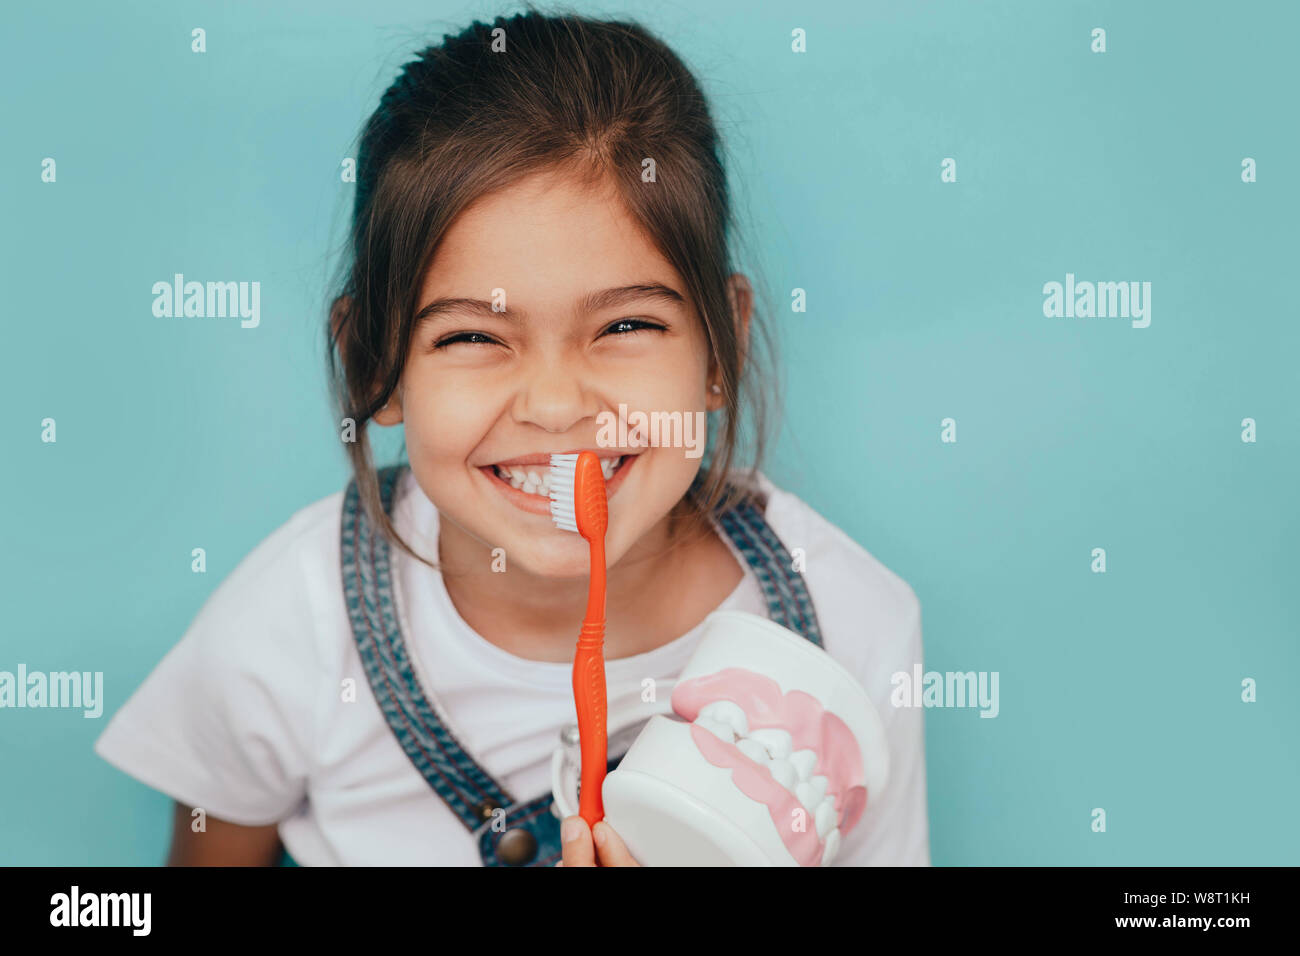 Yes, my teeth is clean. Cute mixed raced girl brushing teeth at blue background. Stock Photo